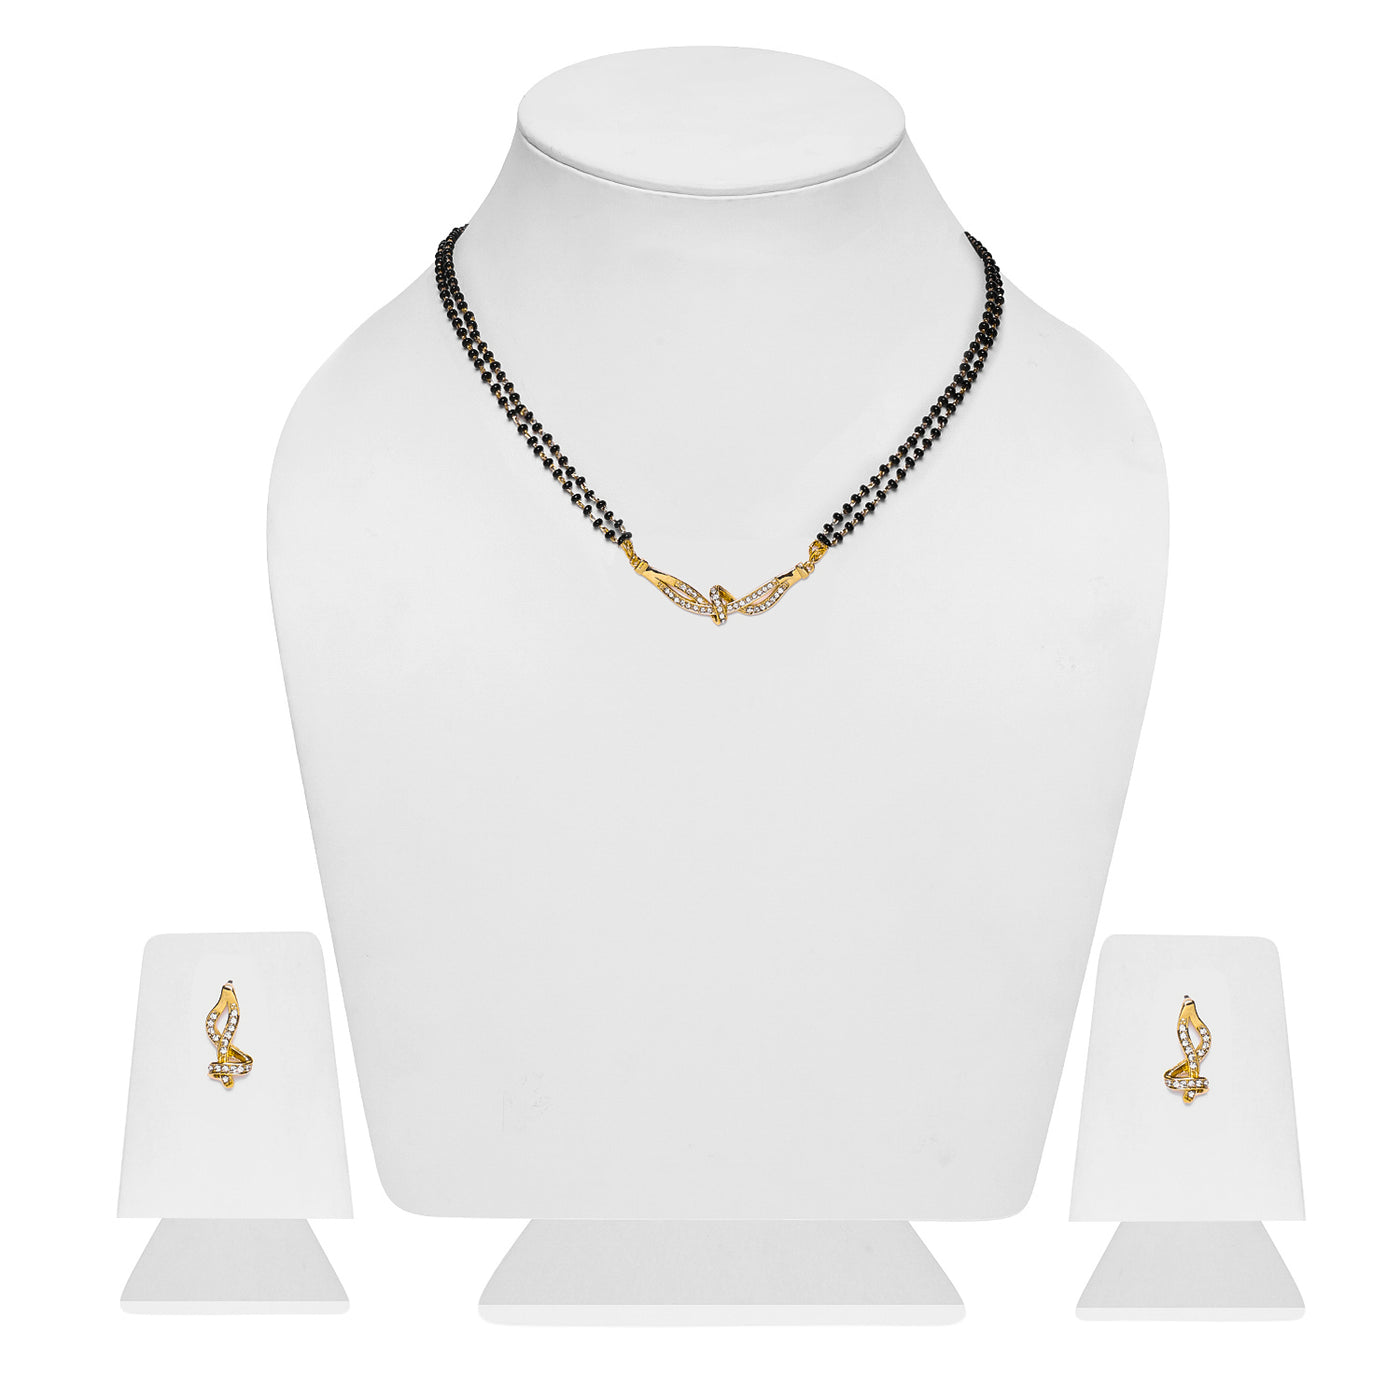 Estele Gold Plated Fascinating Mangalsutra Necklace Set with Austrian Crystals for Women